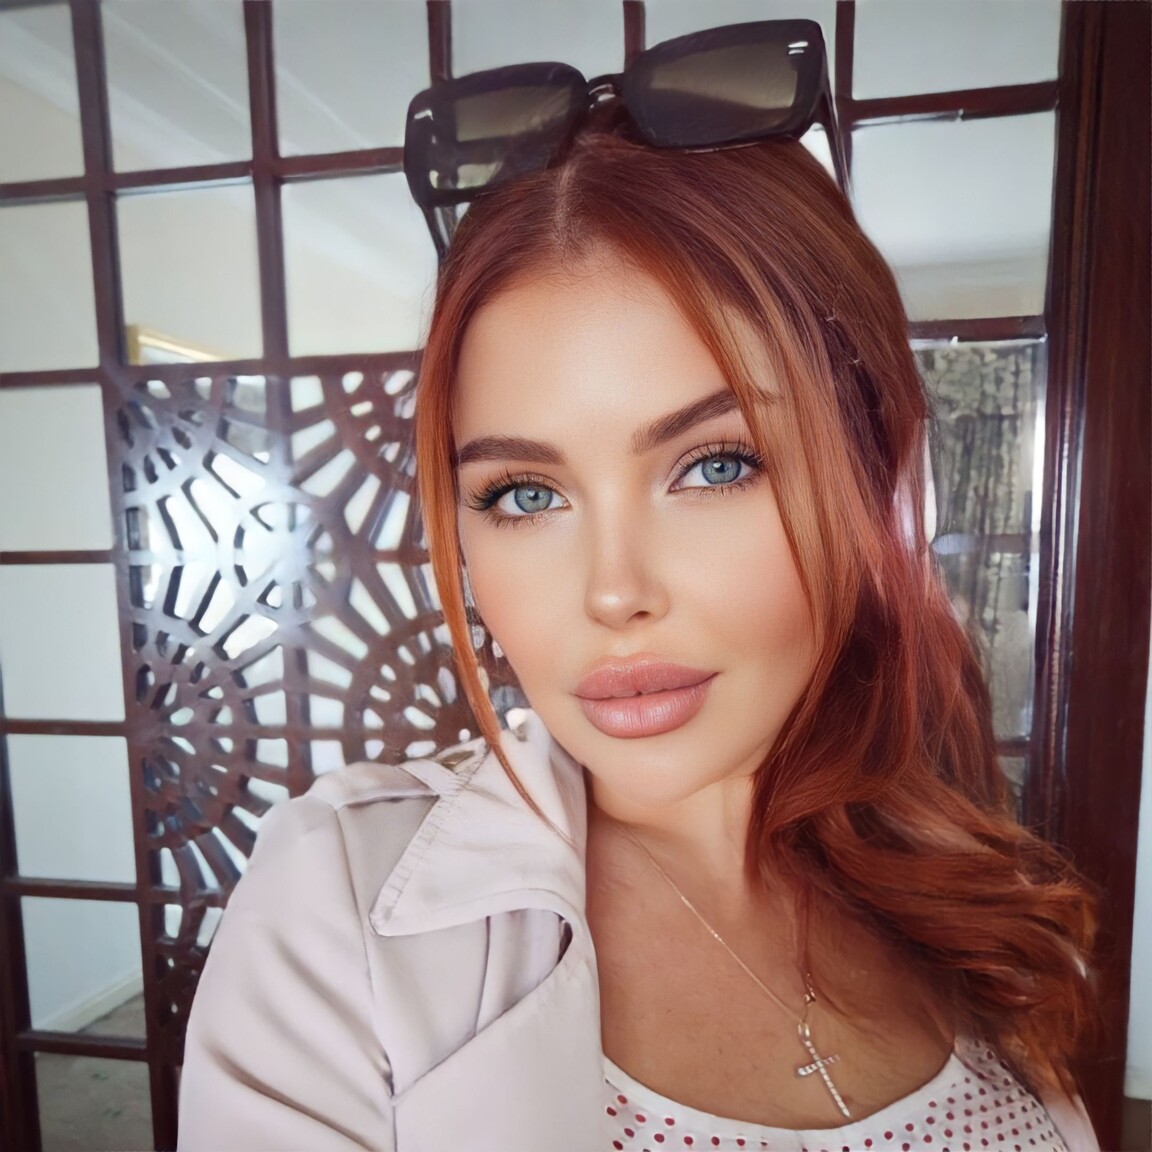 Daria russian dating in south africa